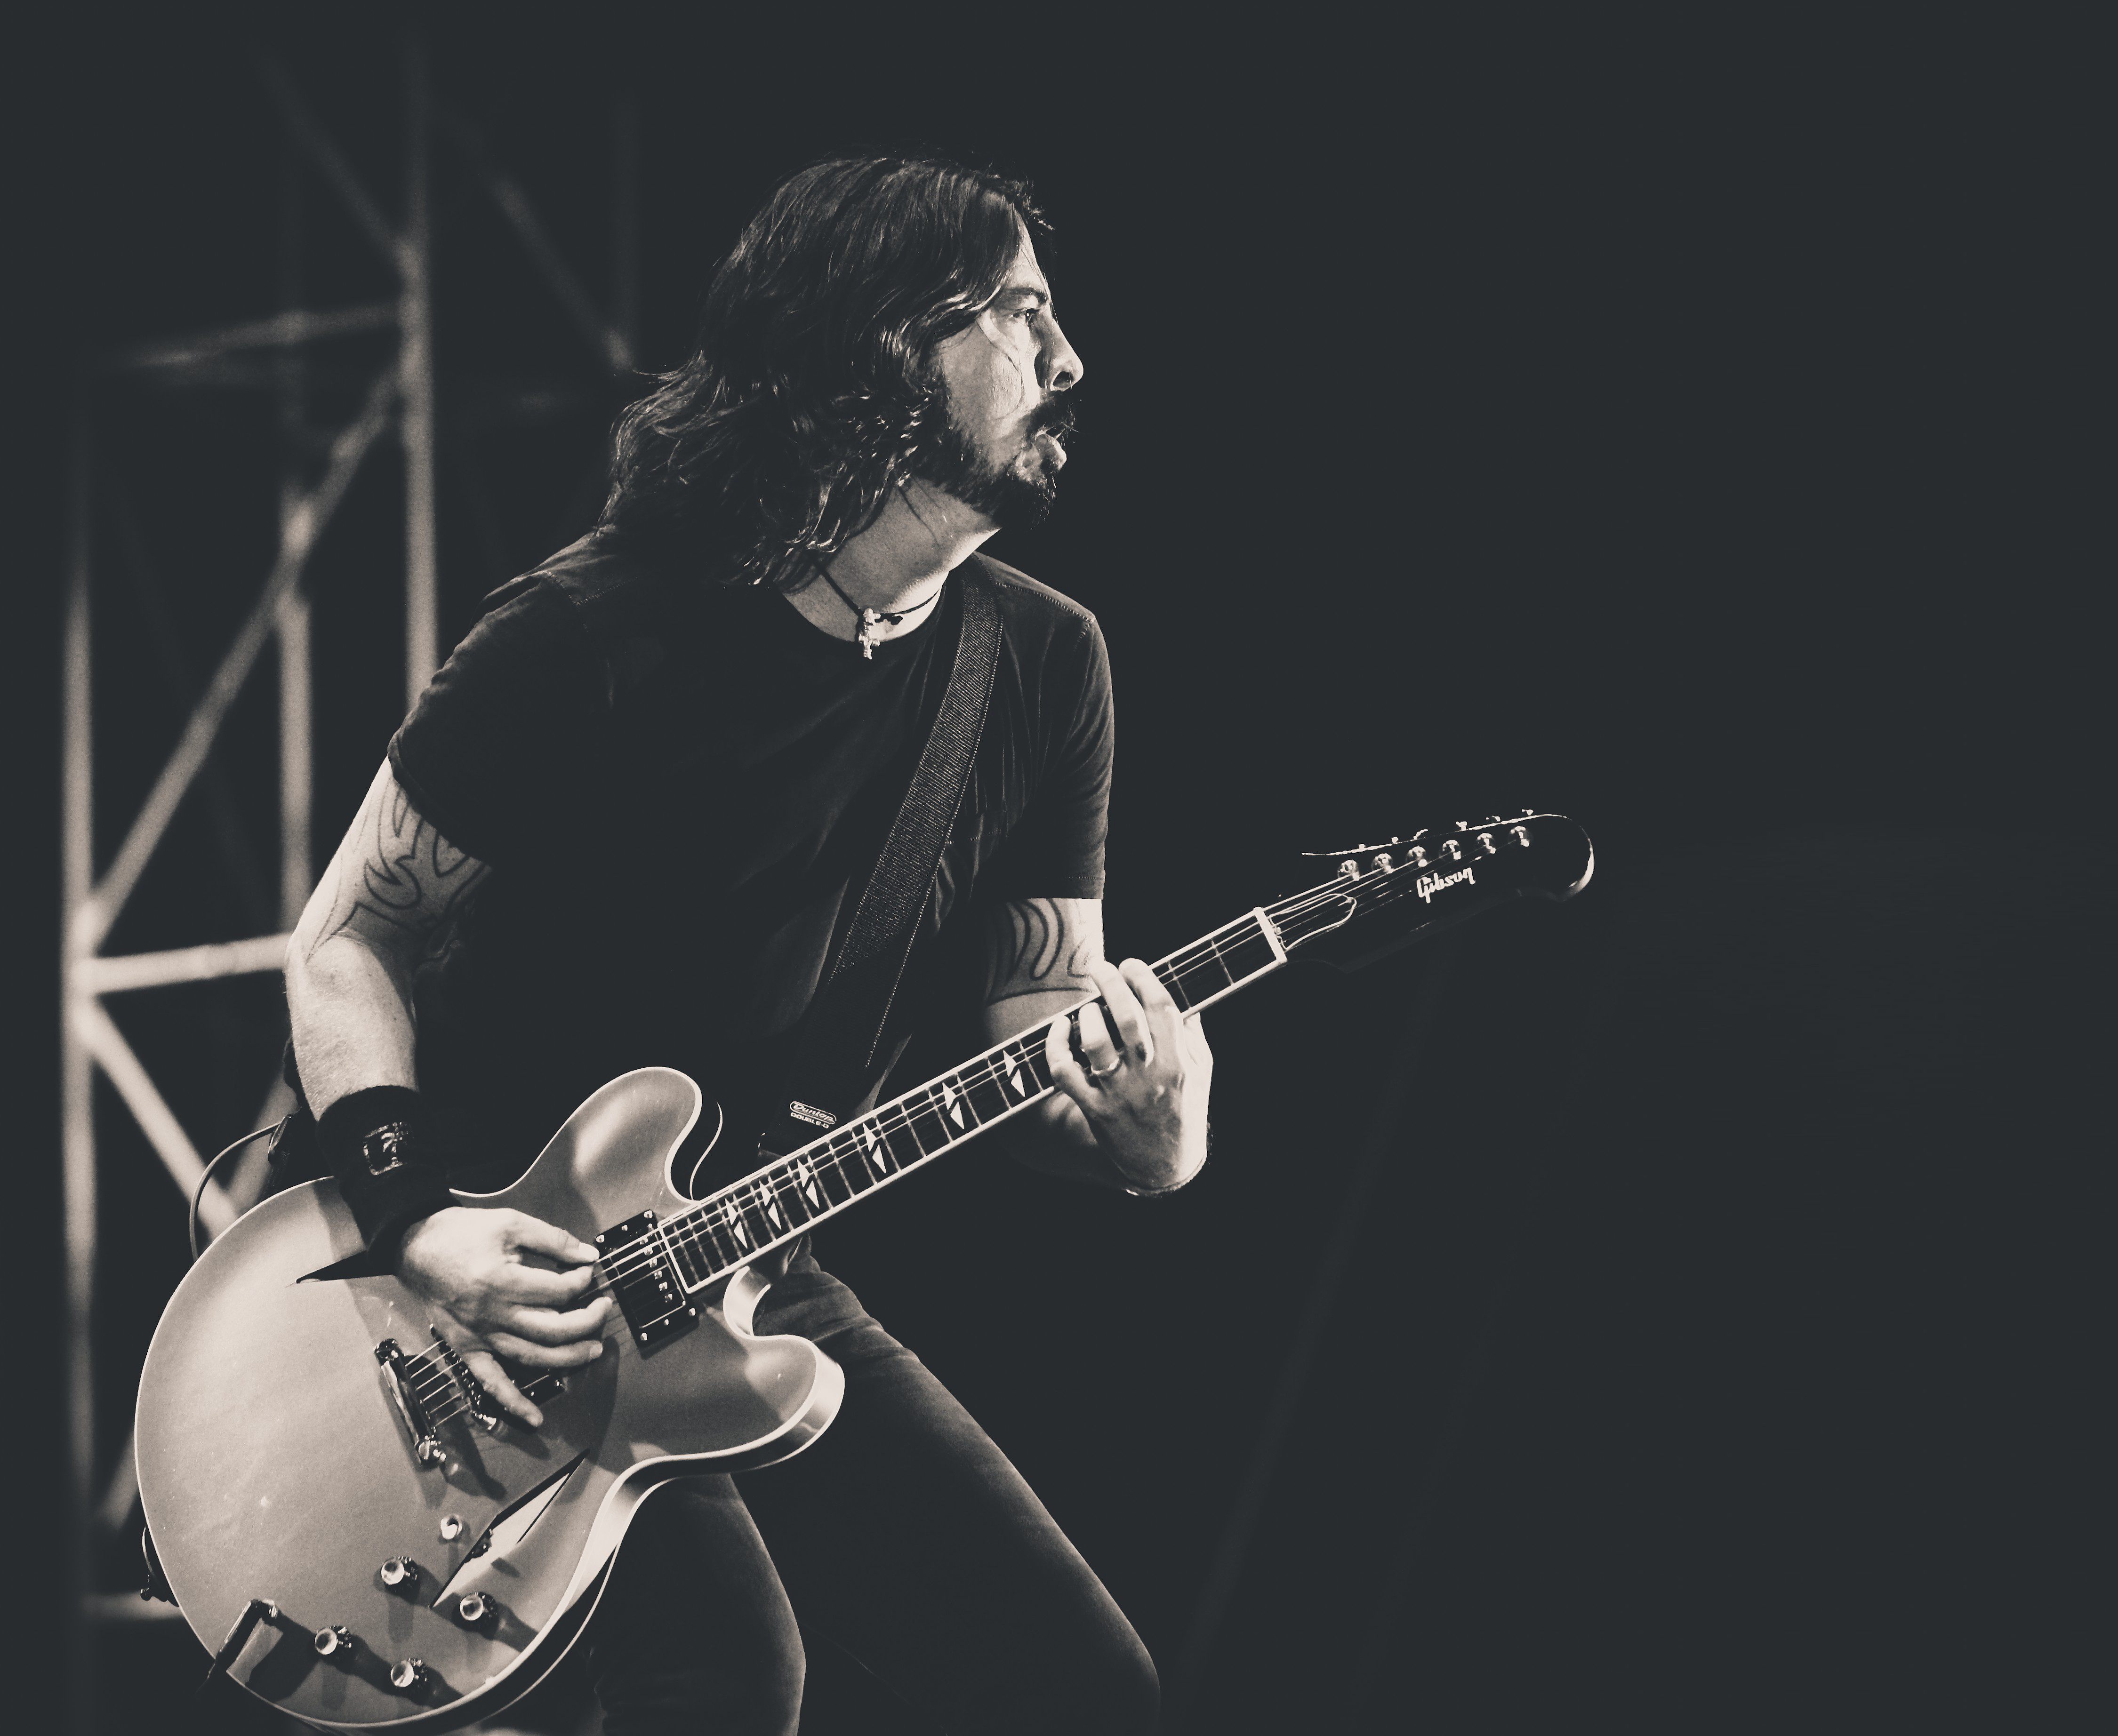 Tour De Lit Bump Agréable 10 Things We Learned Hanging with Dave Grohl – Rolling Stone